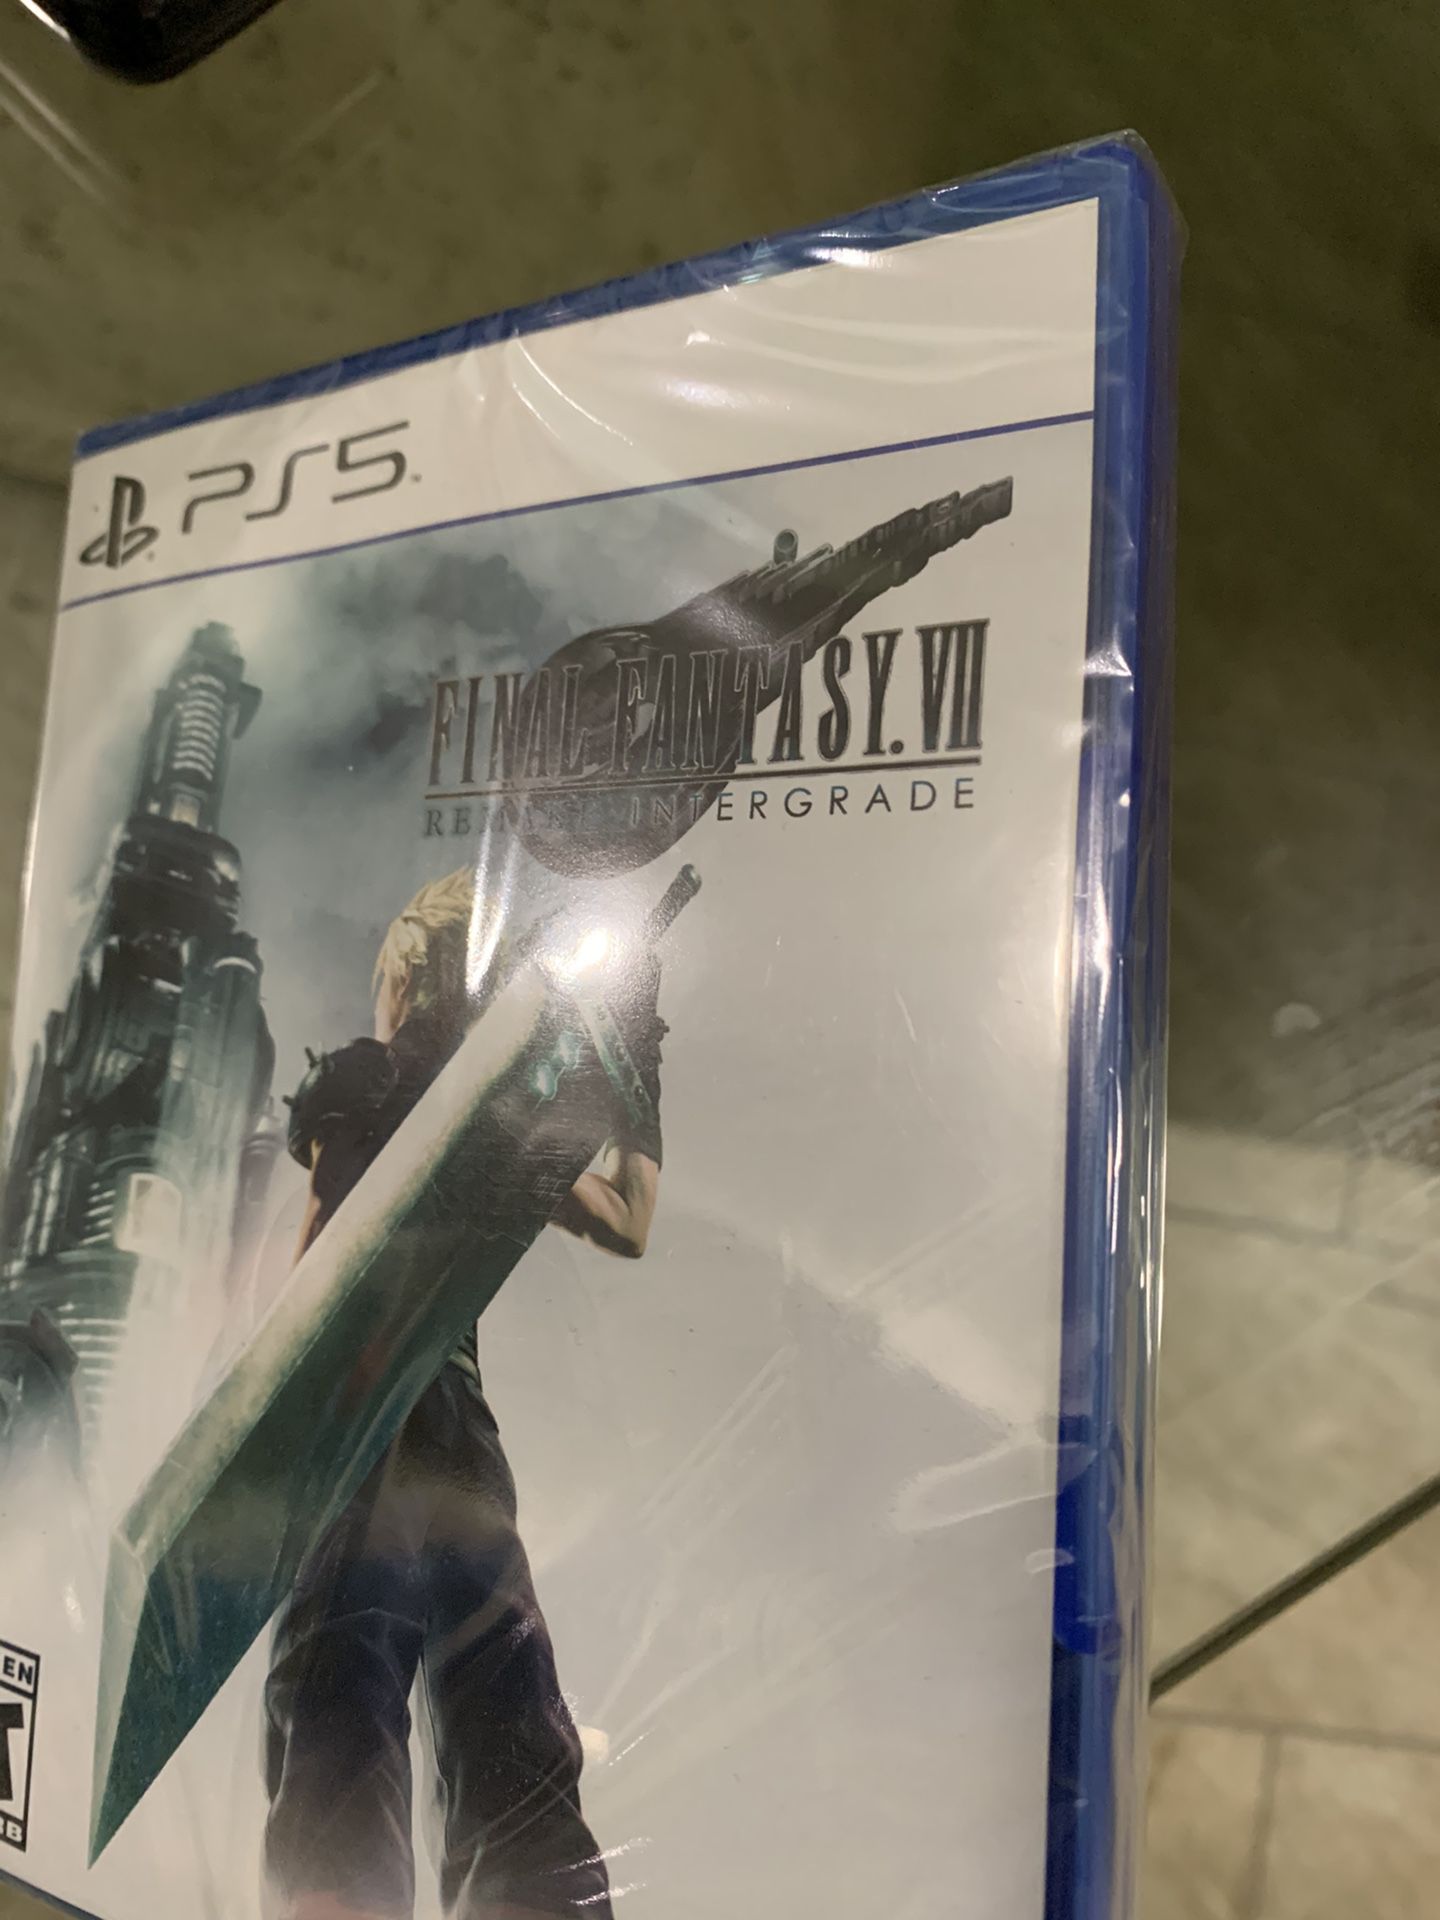 Square Enix Members Final Fantasy IV Collectors Plaque for Sale in  Portland, OR - OfferUp